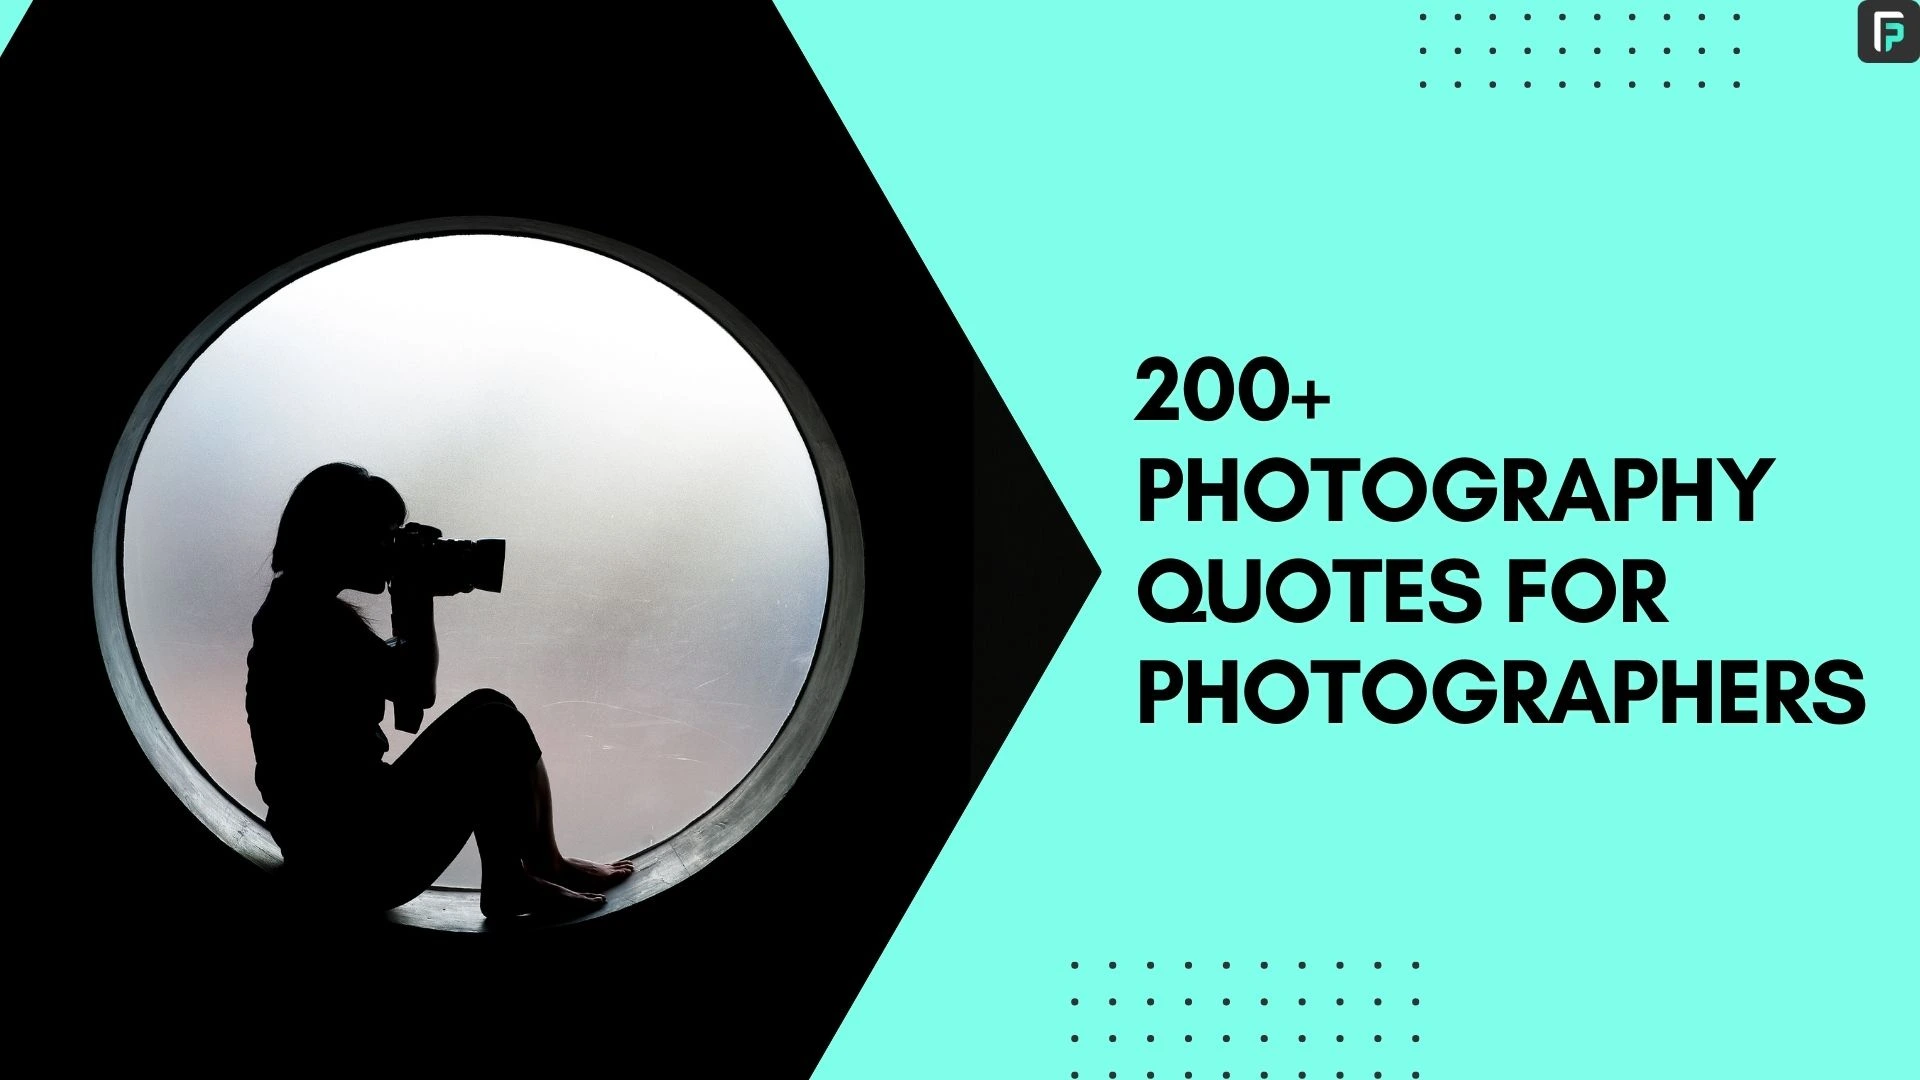 200+ photography quotes for photographers